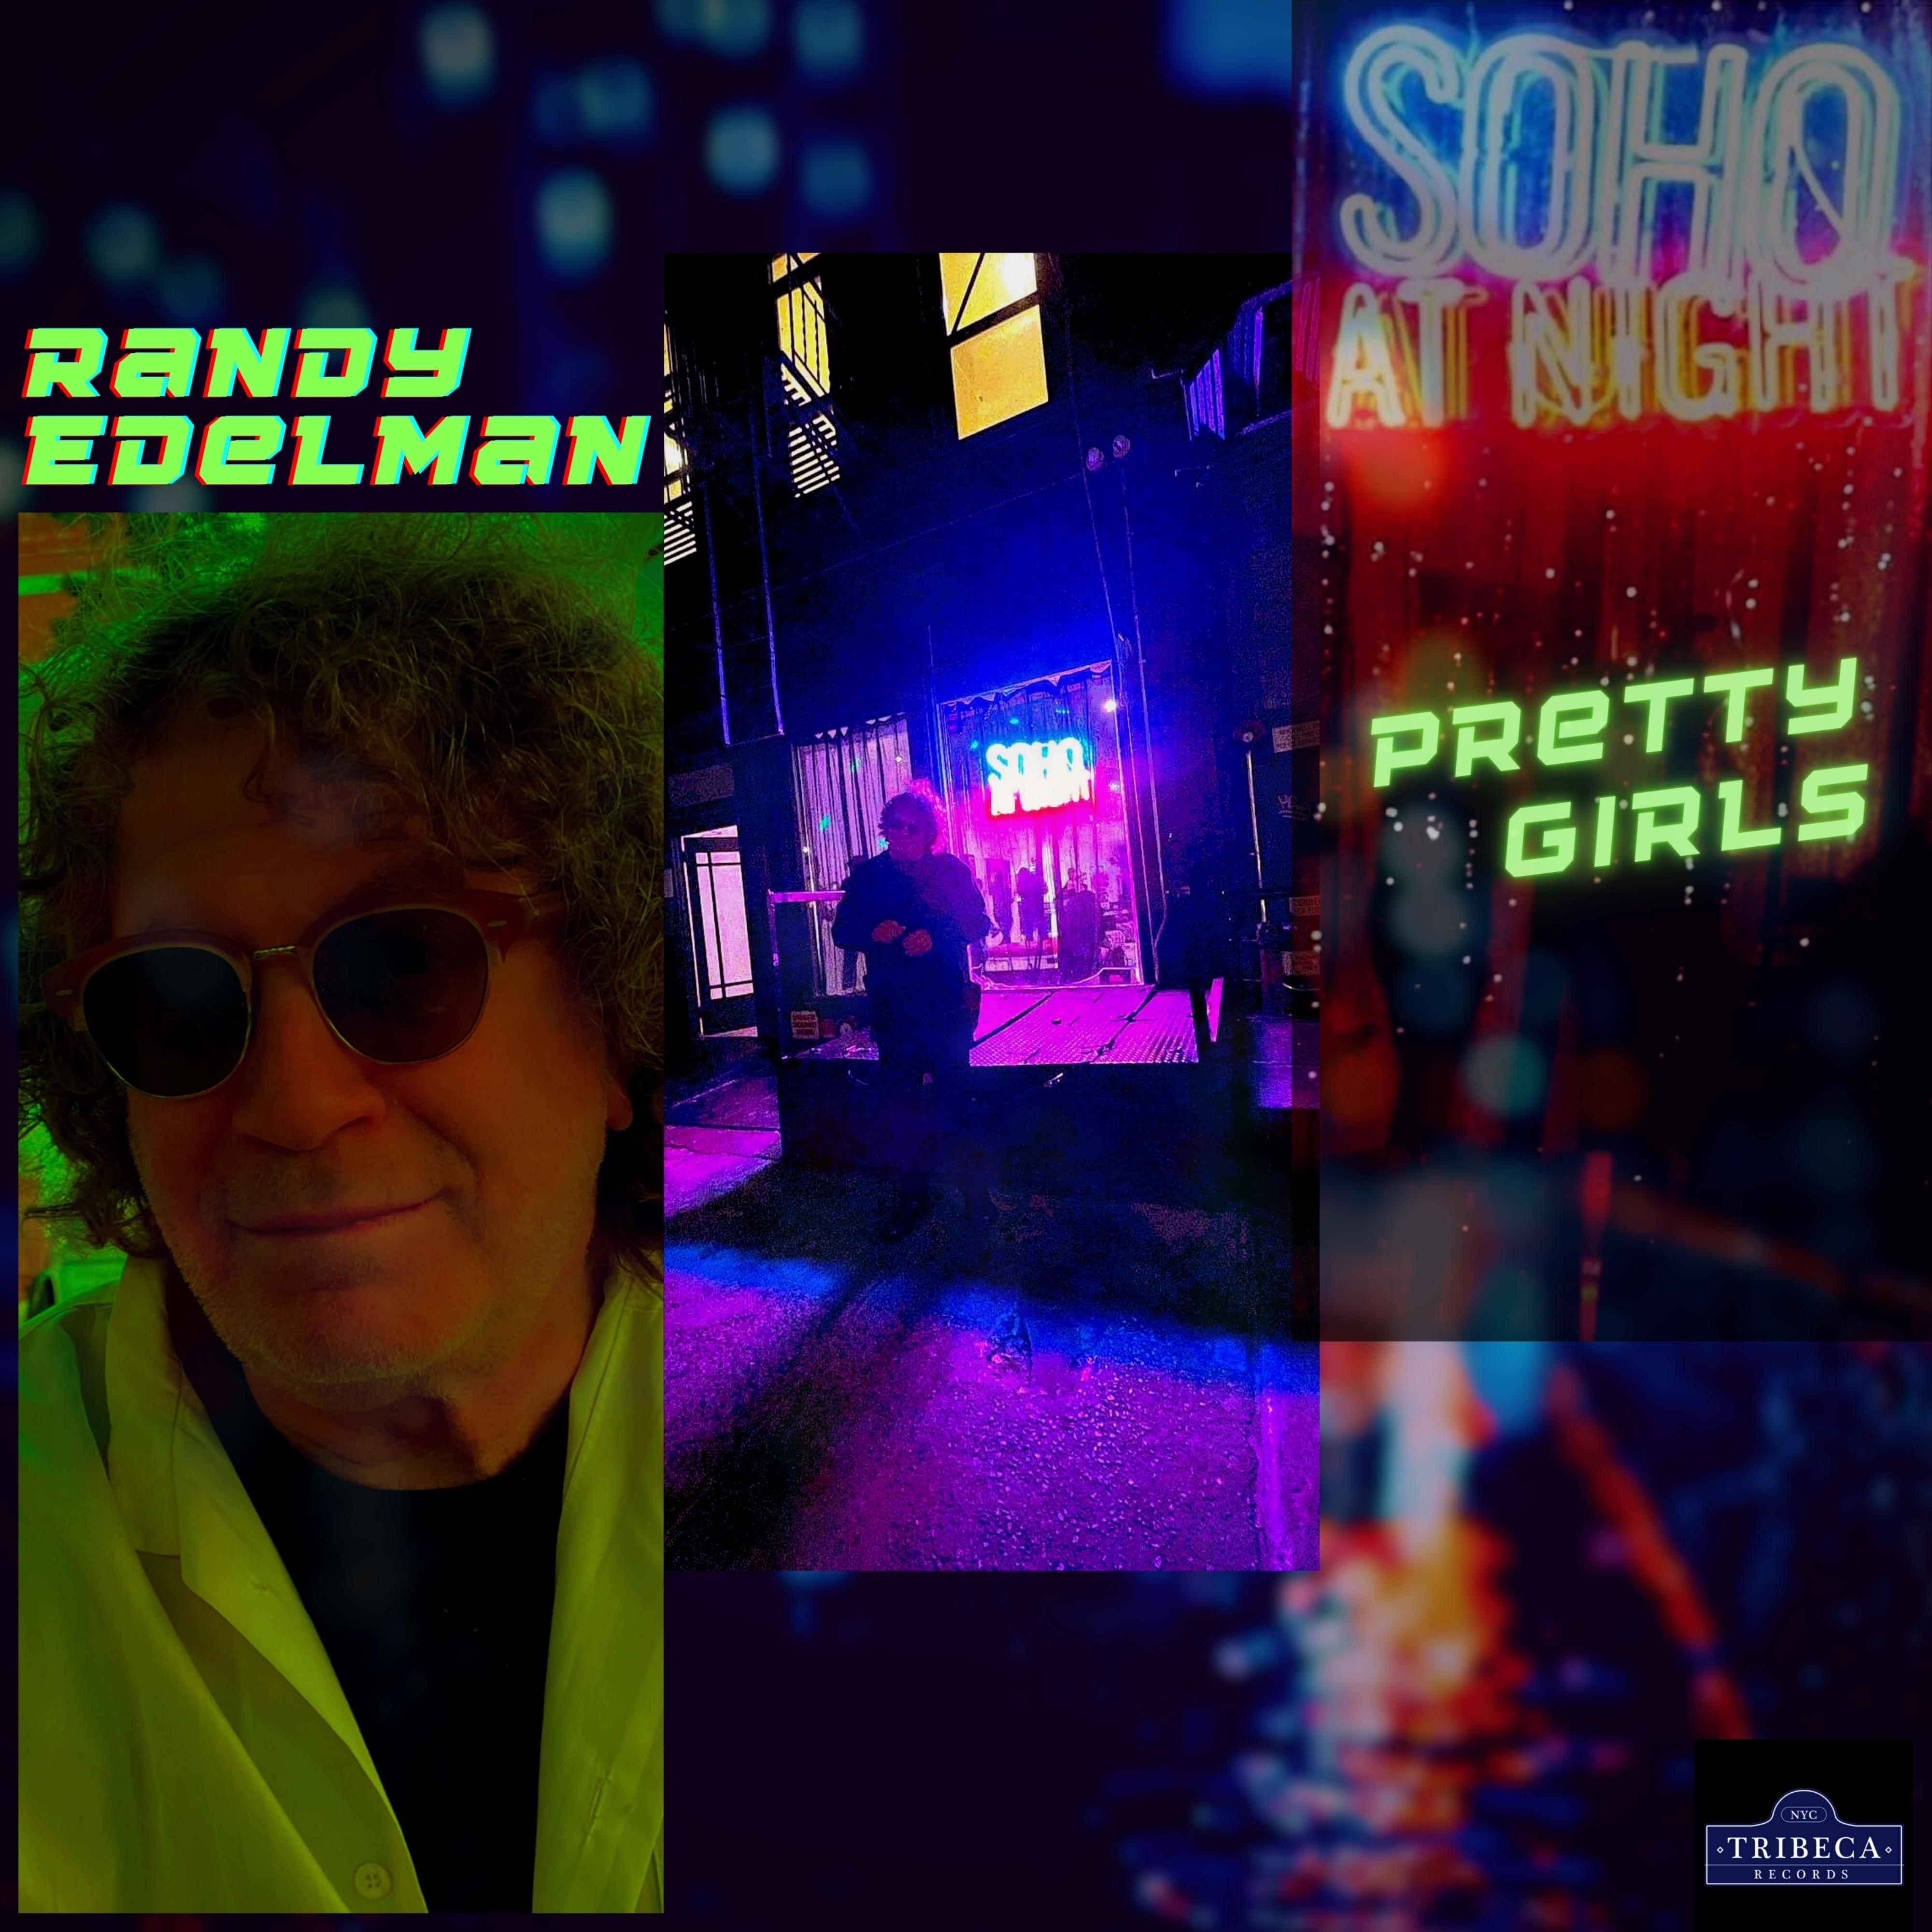 Composer Randy Edelman’s New Single "Pretty Girls" (Can Be Dangerous) Now Available Worldwide via Tribeca Records 